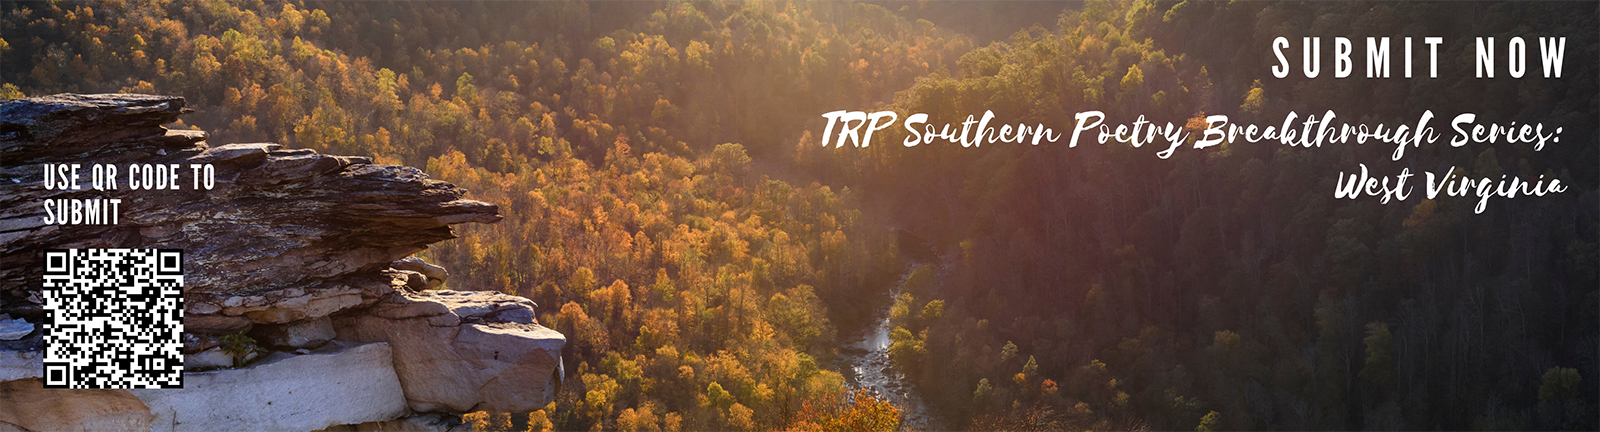 SUBMIT NOW - TRP Southern Poetry Breakthrough Series - West Virginia